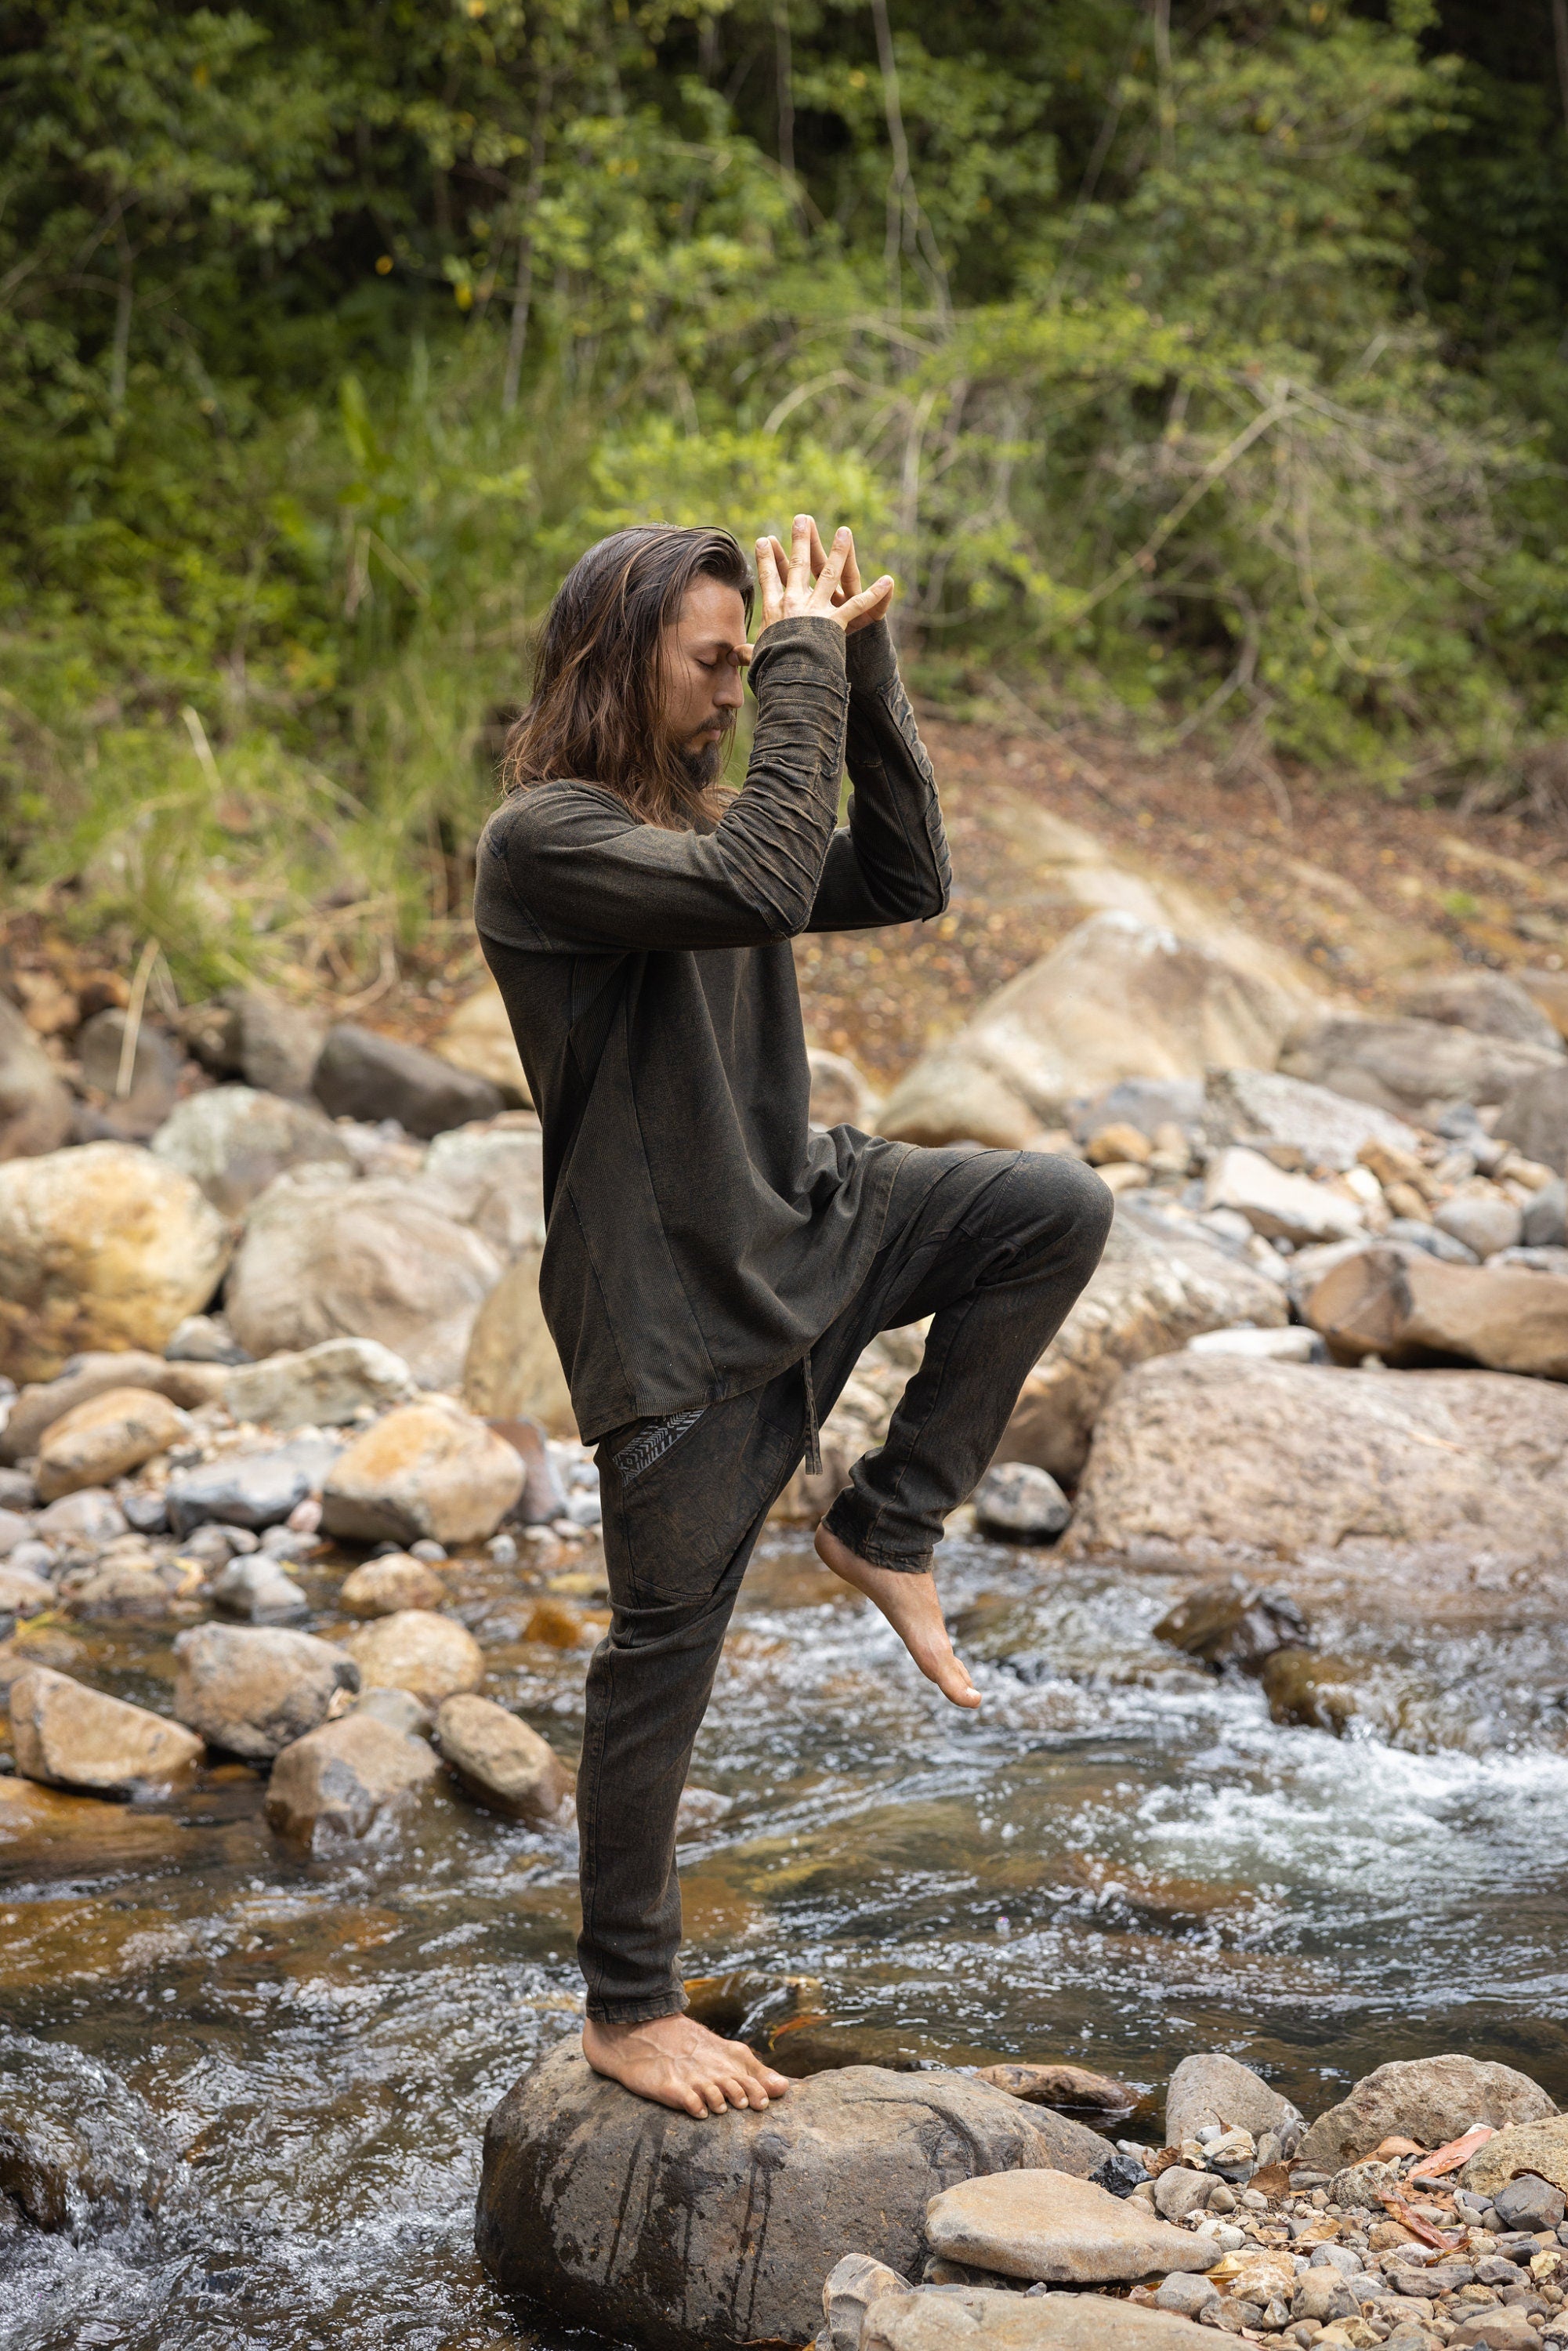 Our JAMIS stone wash jumper is inspired by the Dune trilogy and post-apocalyptic styles. This cozy piece features a soft, stone-washed stretchy cotton fabric that is both comfortable and durable. The jumper has a relaxed, loose fit.